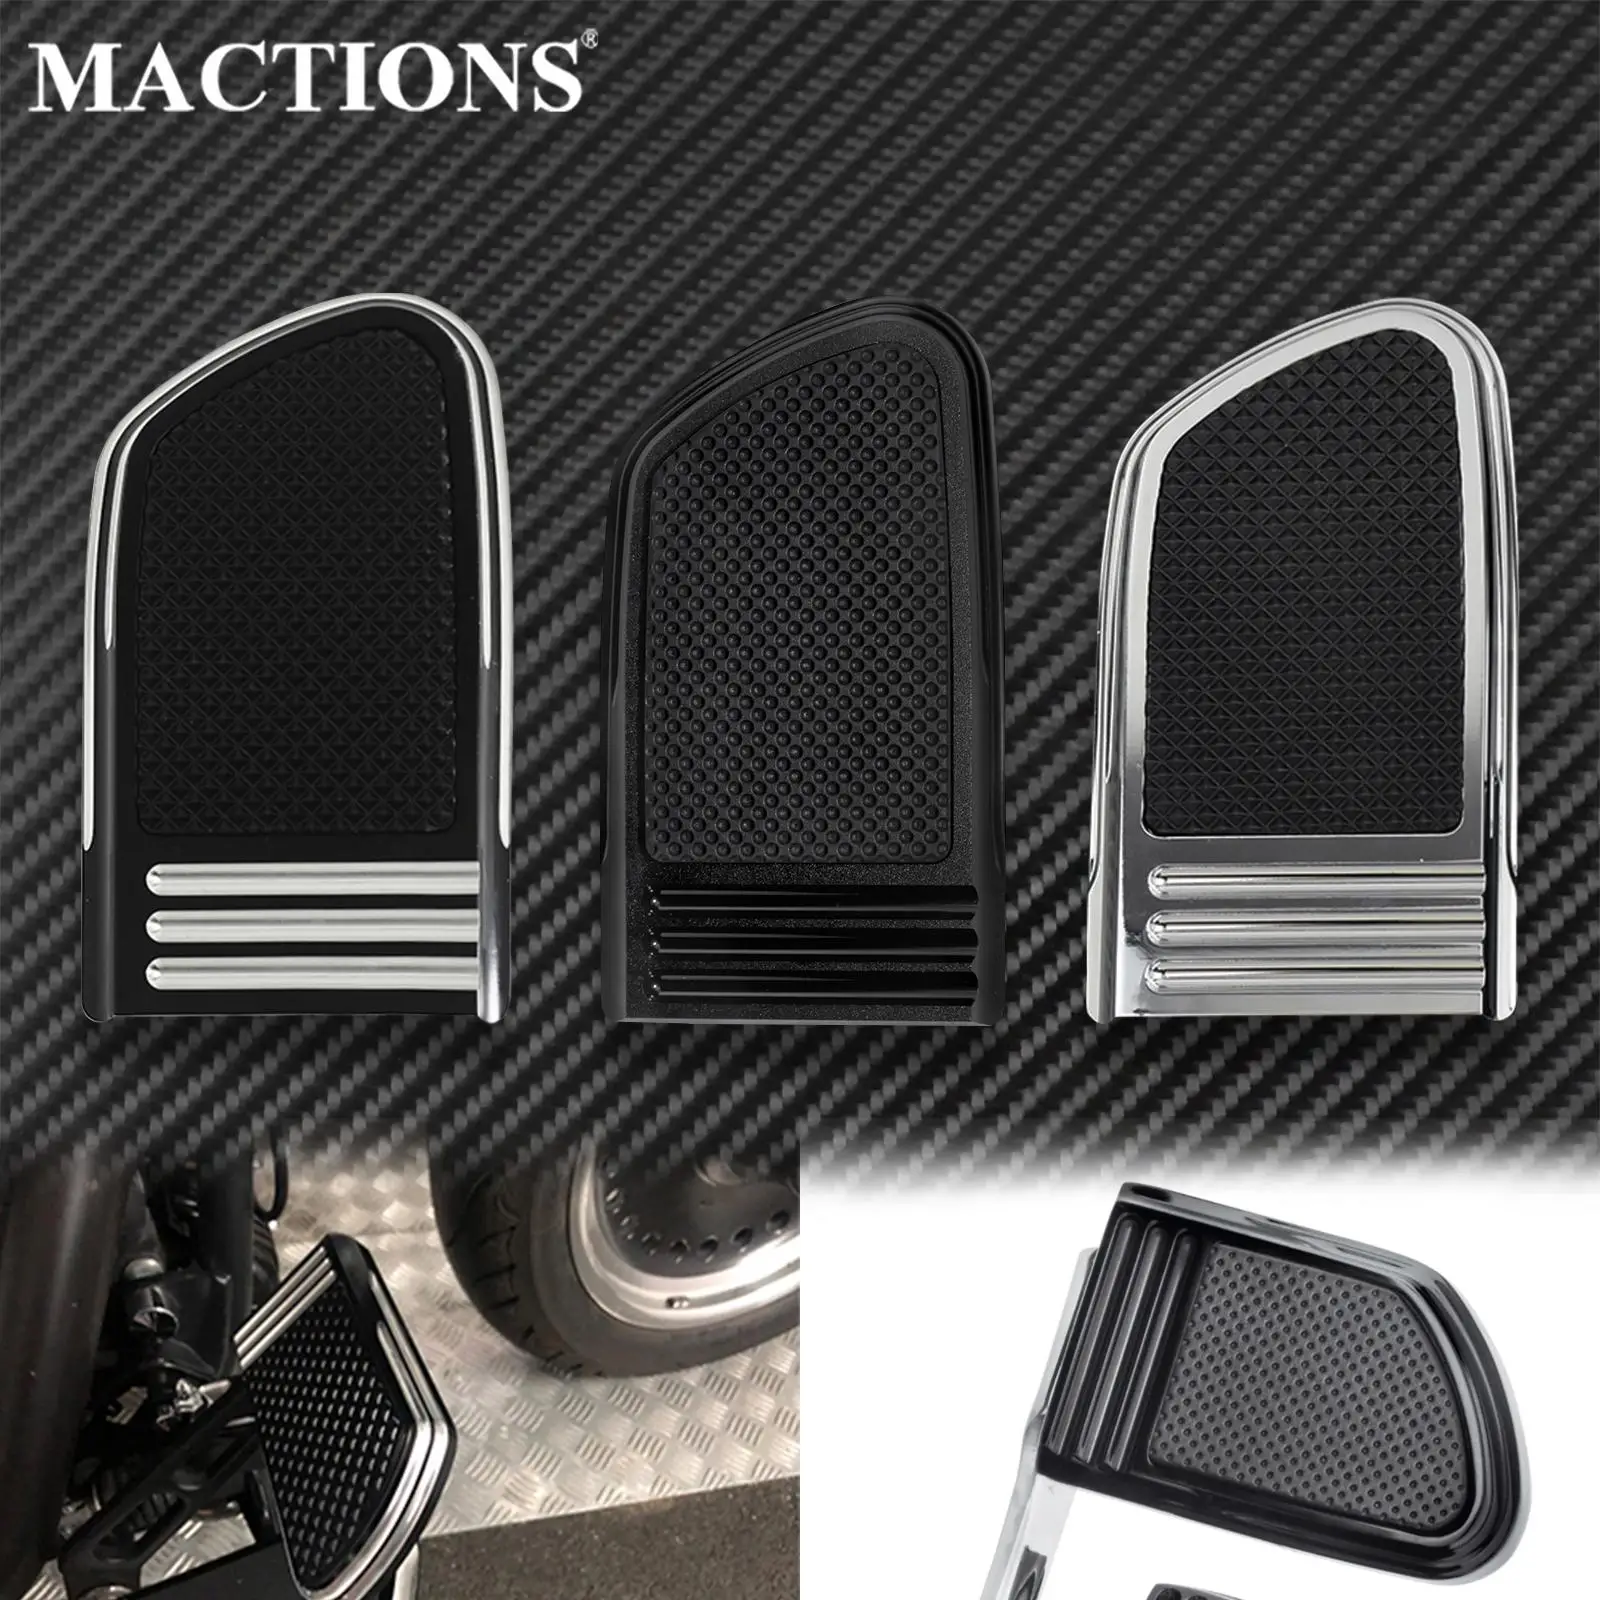 Motorcycle Brake Pedal Pad Cover Black Chrome For Harley Touring Electra Glide FLHT Heritage Softail 1986-2017 Dyna FLD 2012-Up